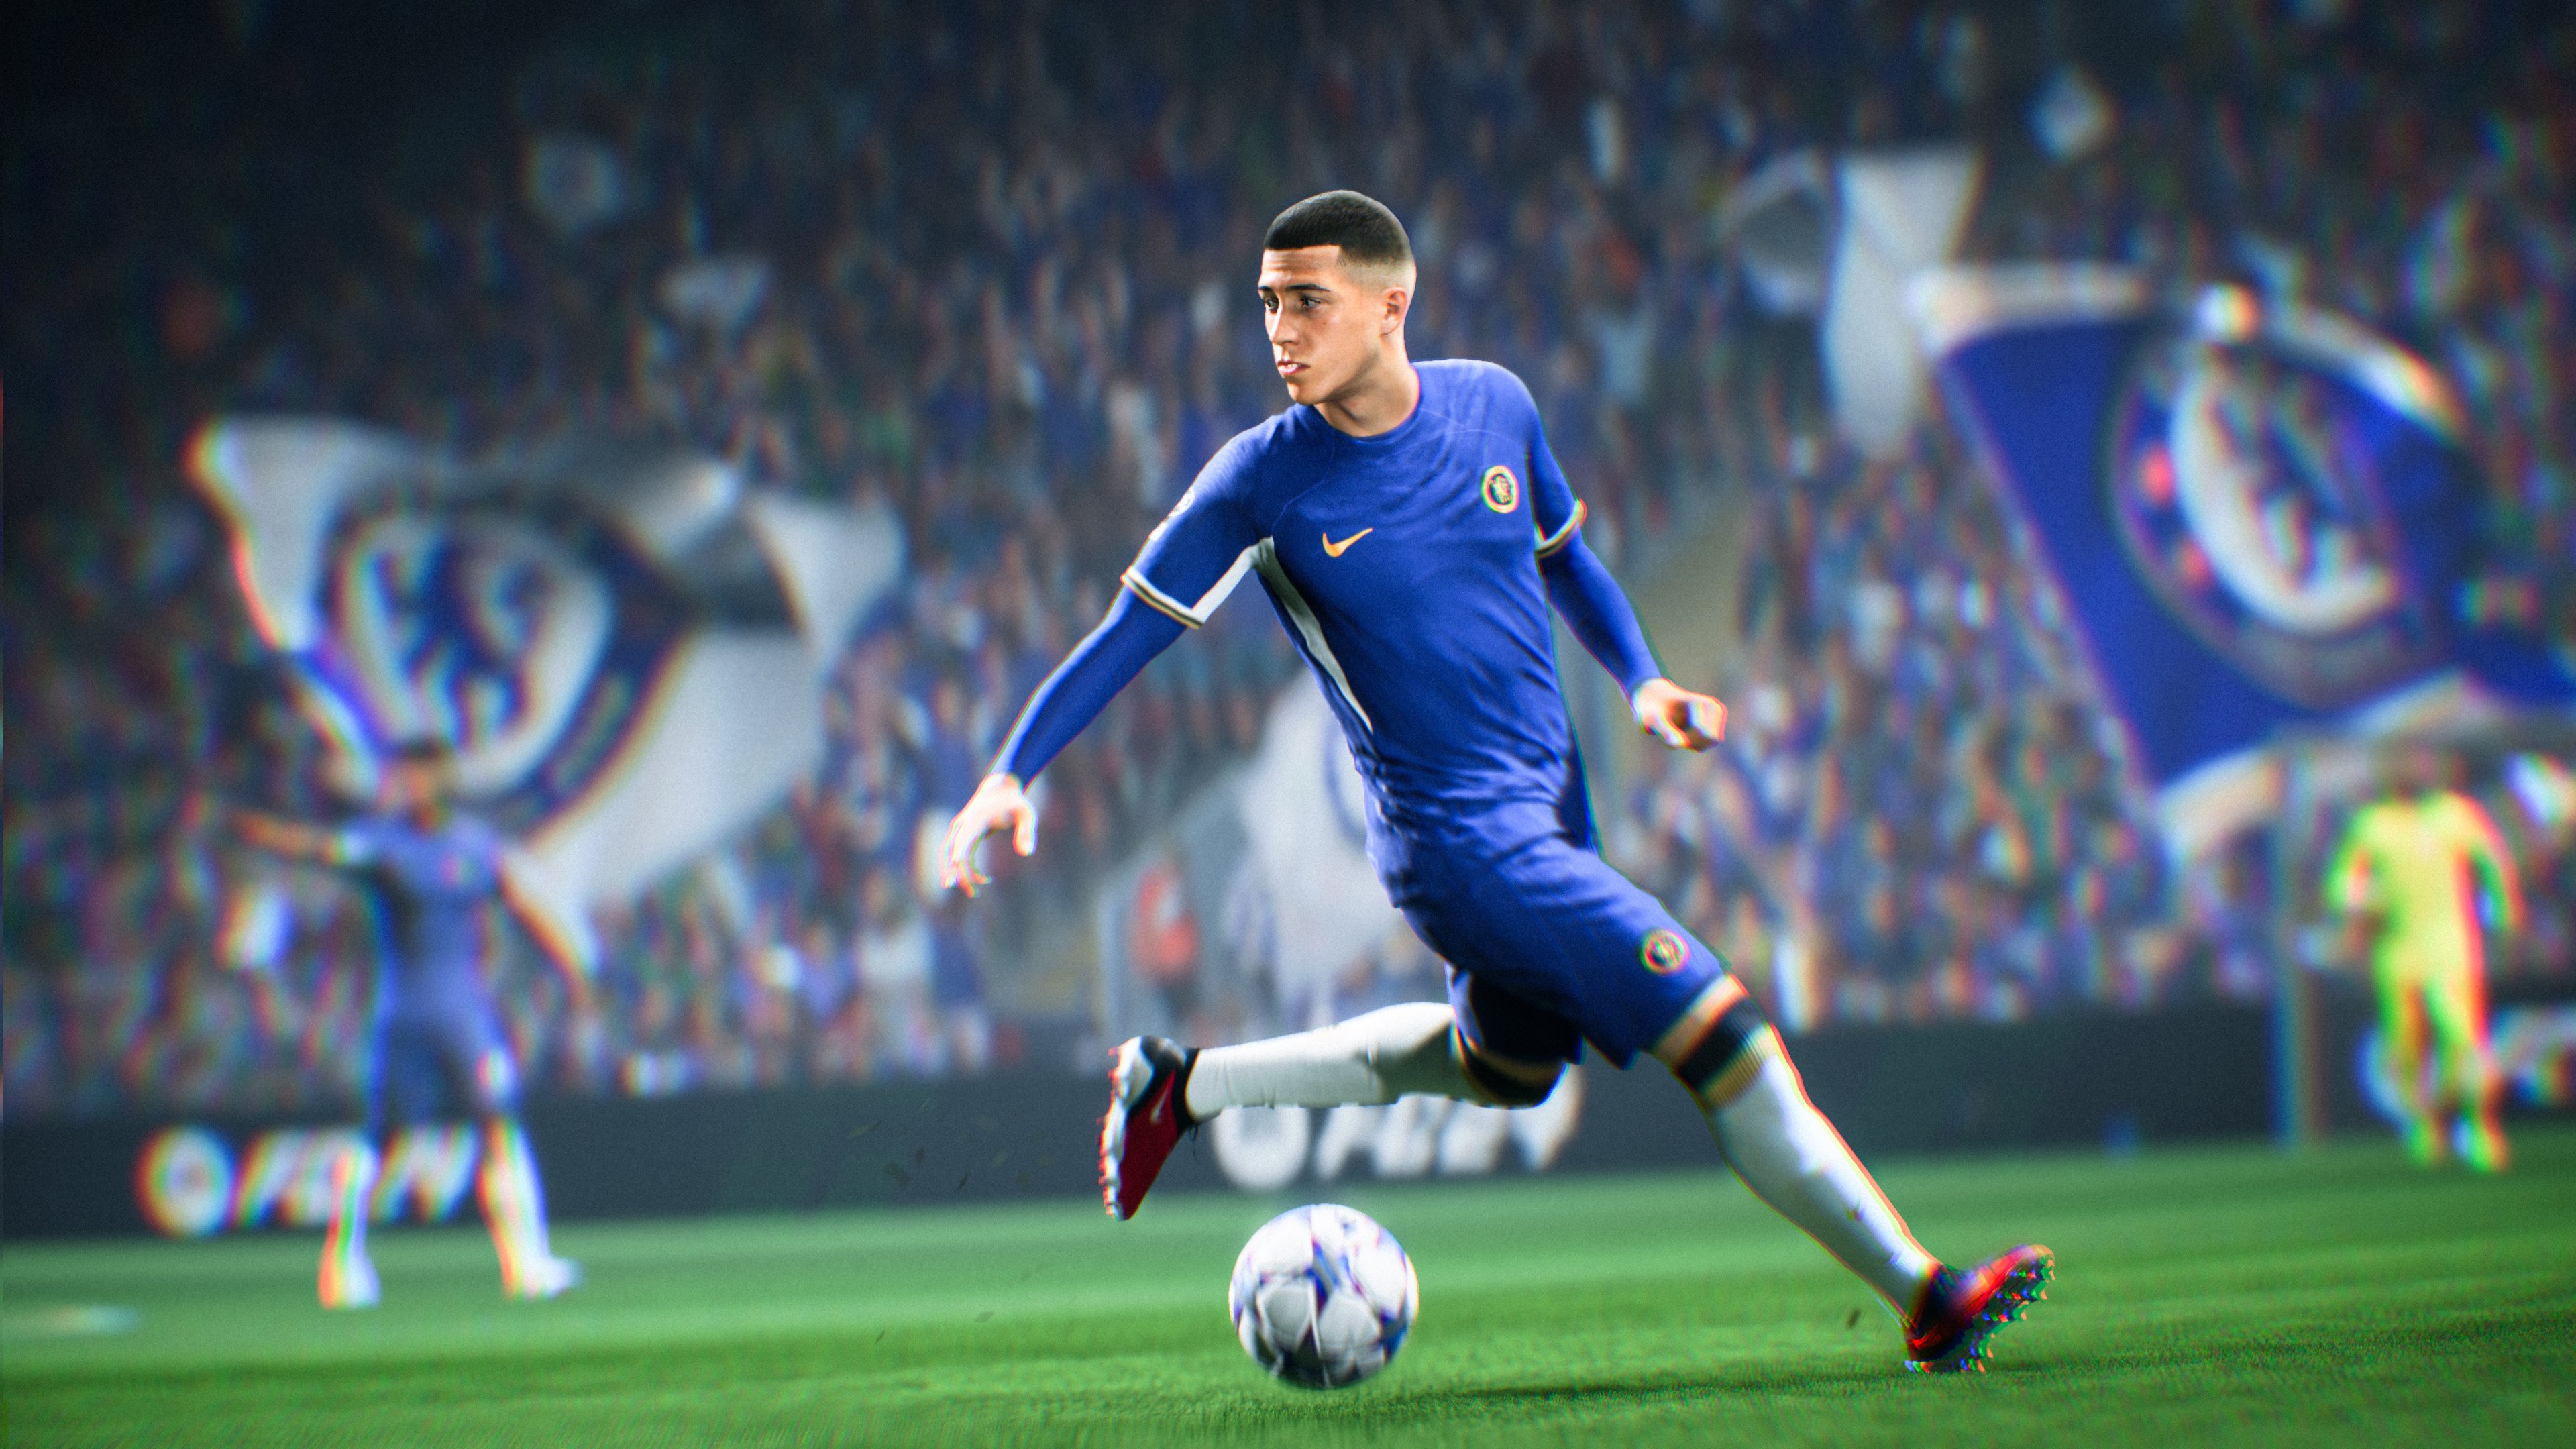 FIFA 18 Server DOWN: EA Server Status and connectivity problems